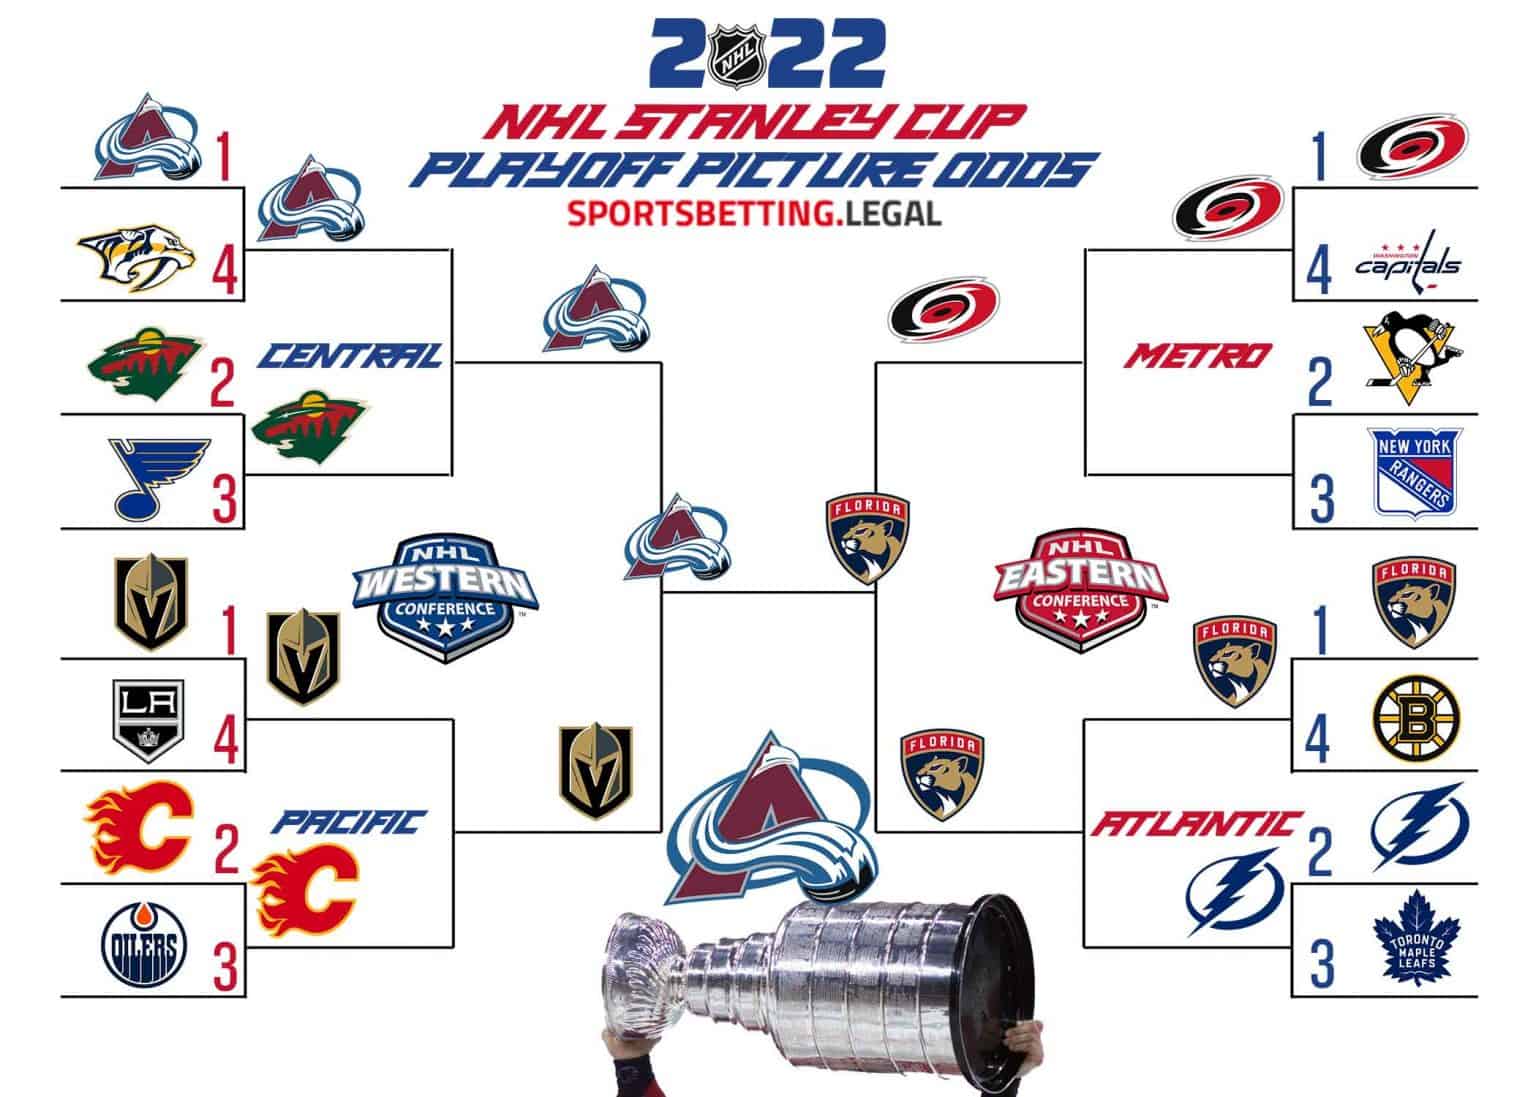 202223 NHL Stanley Cup Playoff Picture Odds vs. Standings